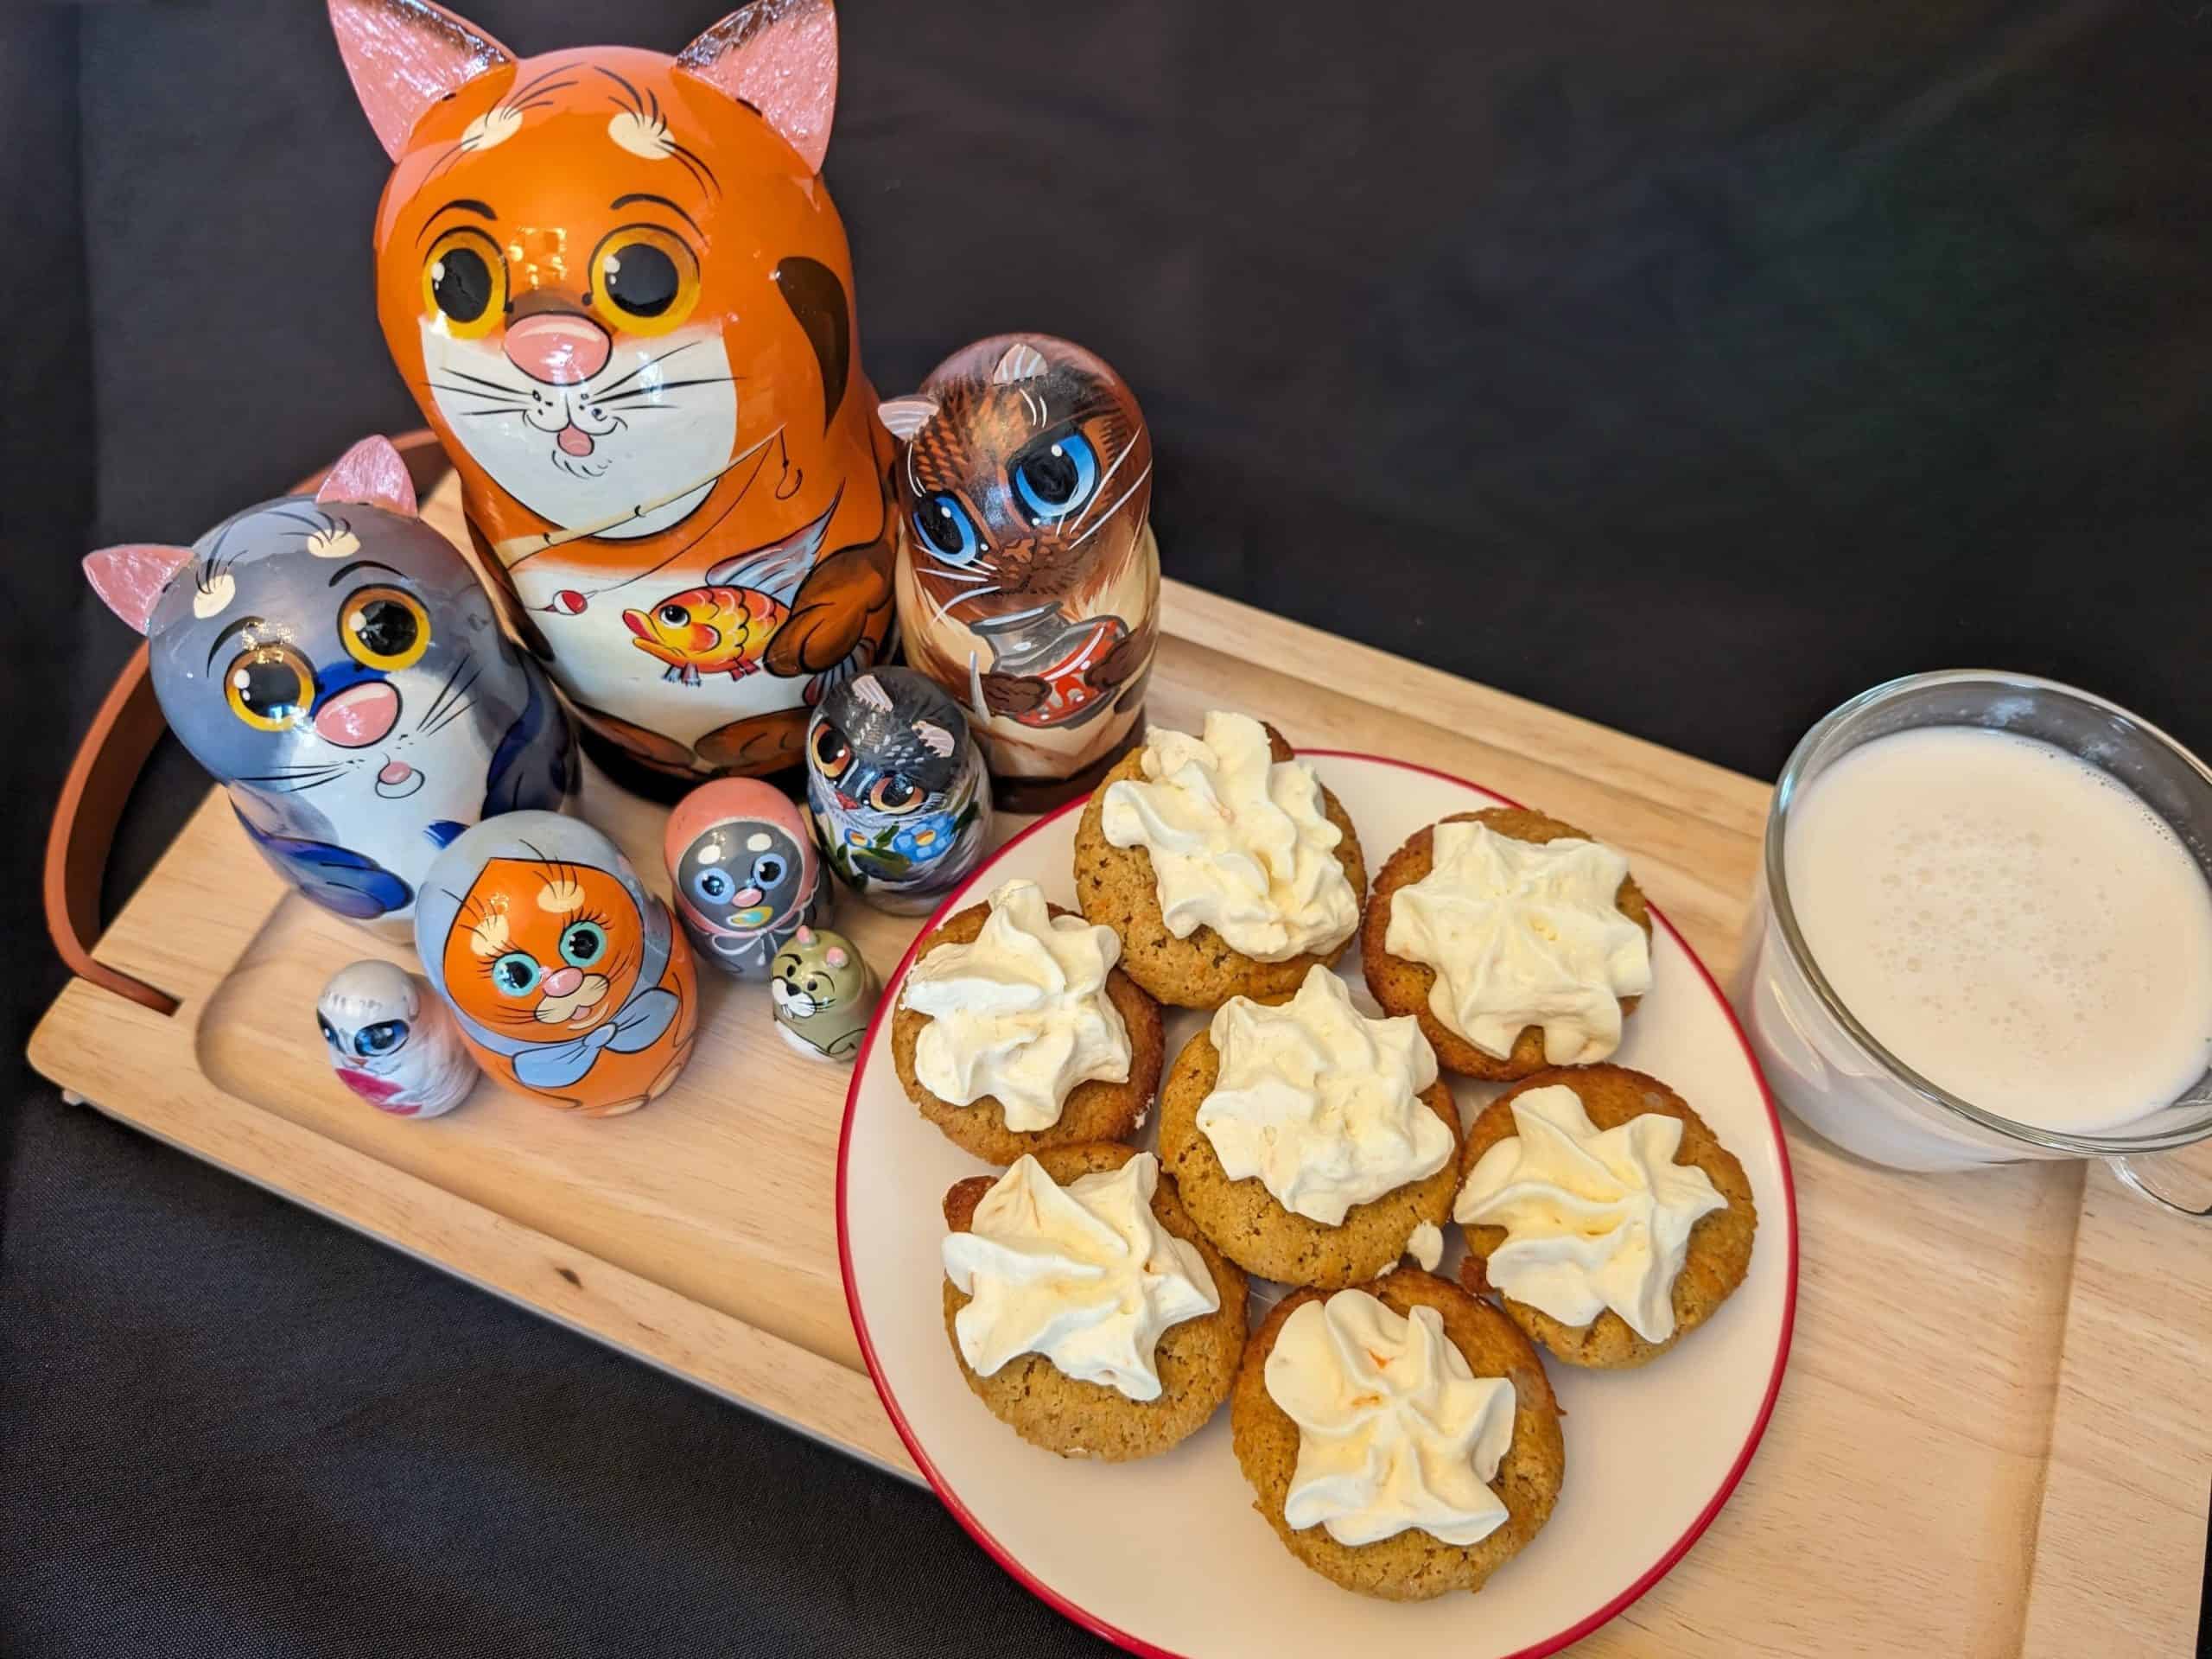 Feature Image for Small Bites and Creamy Cheesy Delights Dinner Party showing cat matryoshka dolls, a small cup of milk, and small cookie bites with a cream cheese frosting